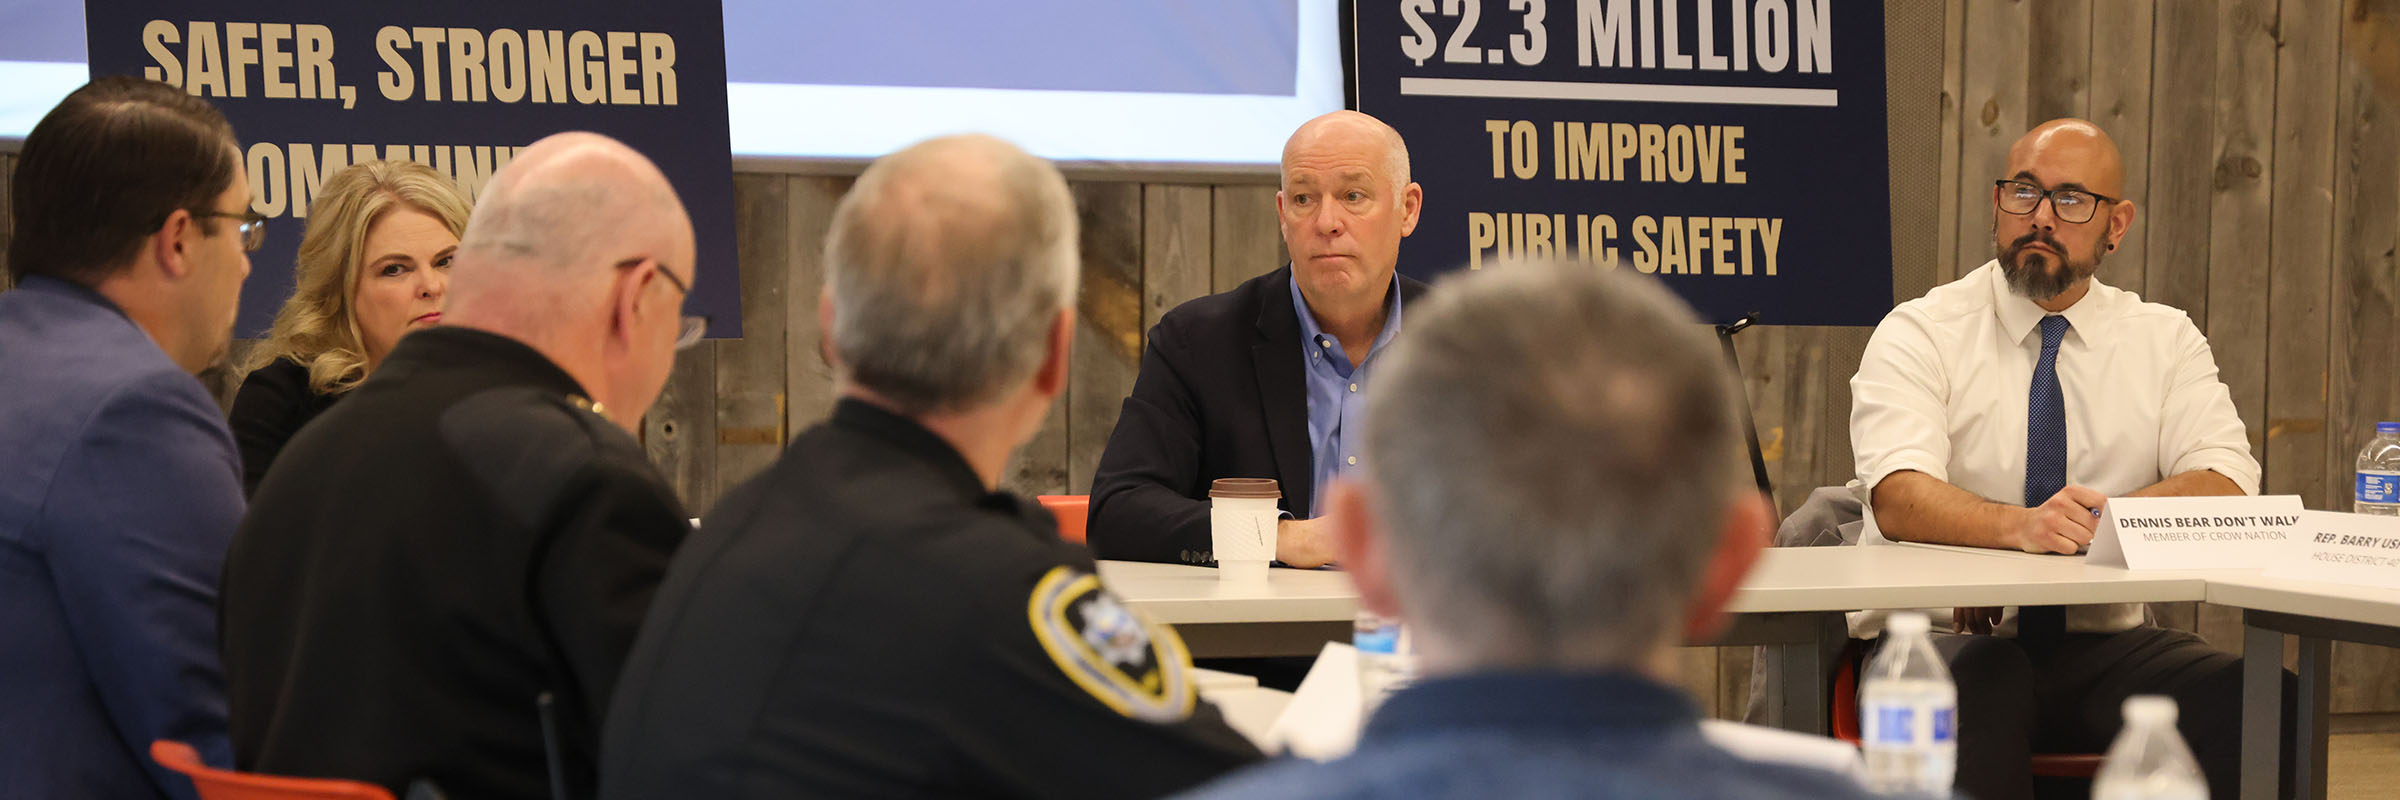 Gov. Gianforte, Local Leaders Partner to Improve Public Safety in Billings and Yellowstone County